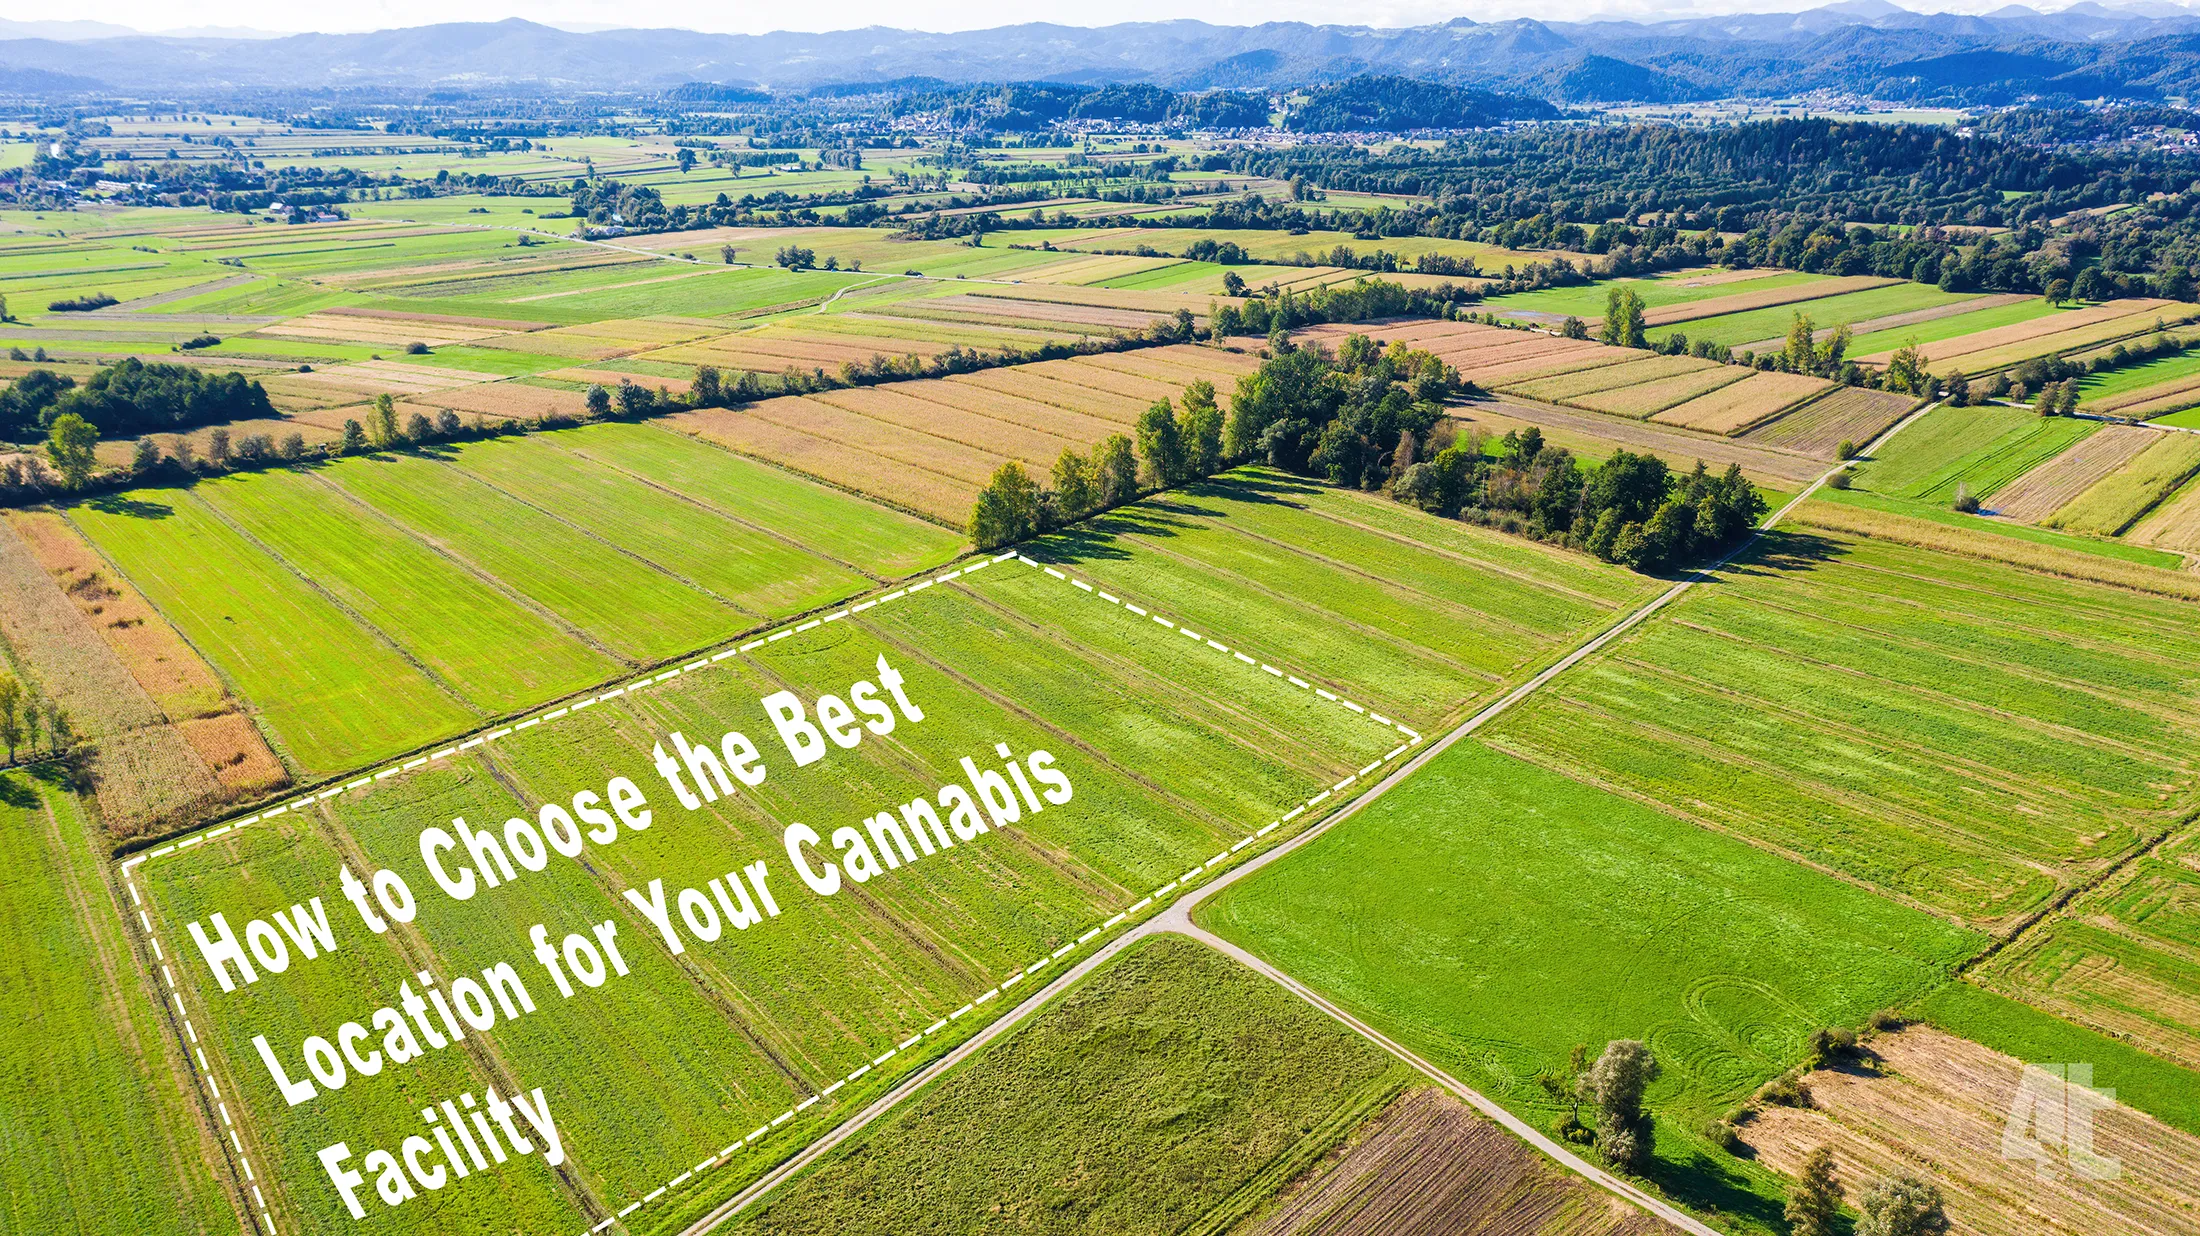 empty fields with writing that says "How to choose the best location for your cannabis facility"